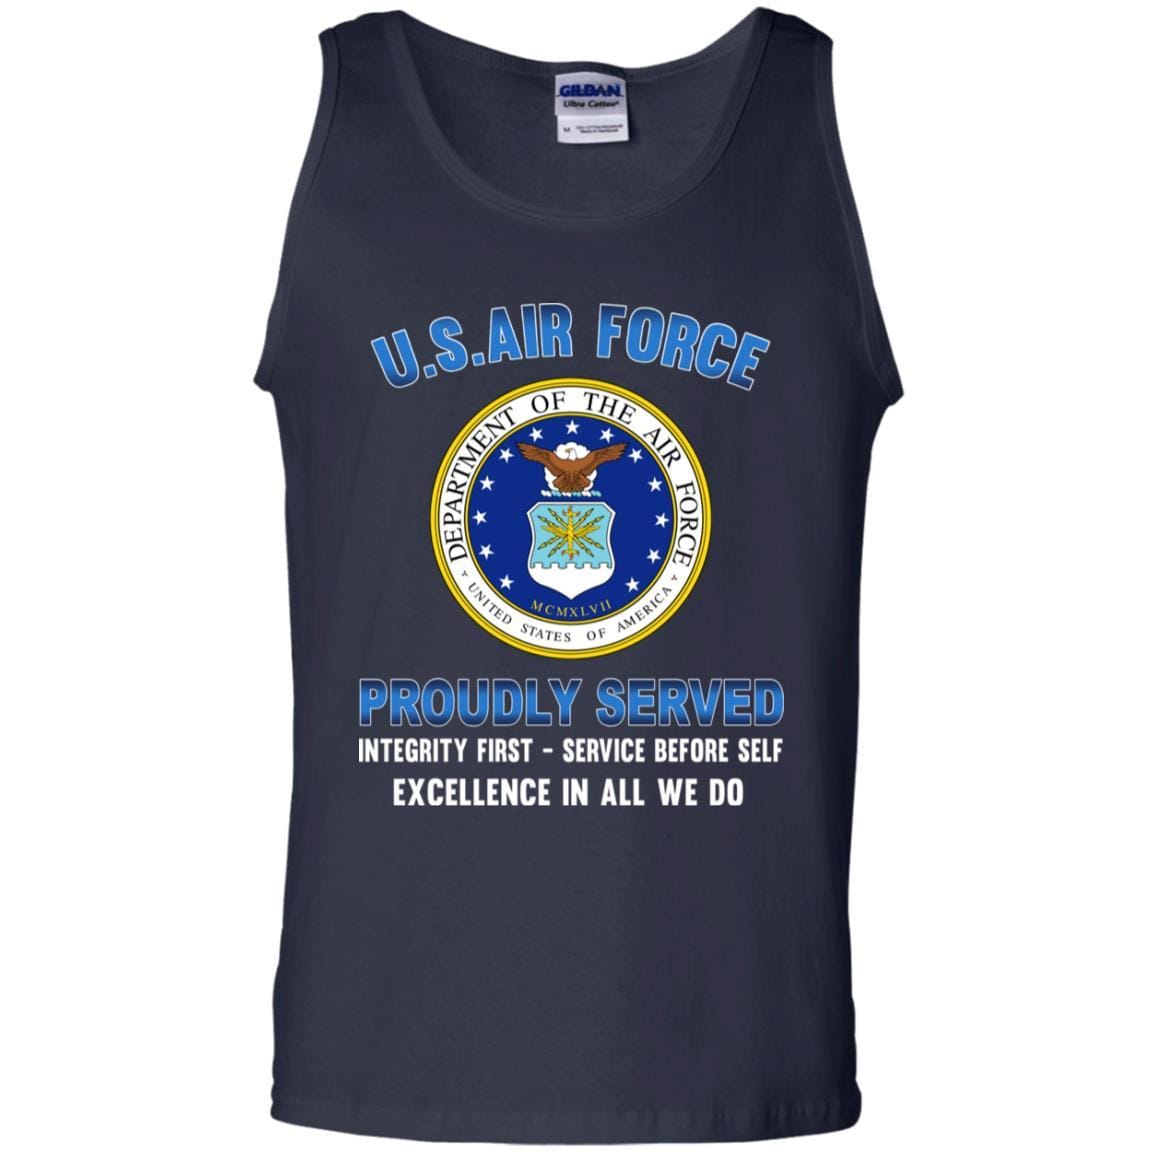 US Air Force Eagle Logo Proudly Served T-Shirt On Front-TShirt-USAF-Veterans Nation